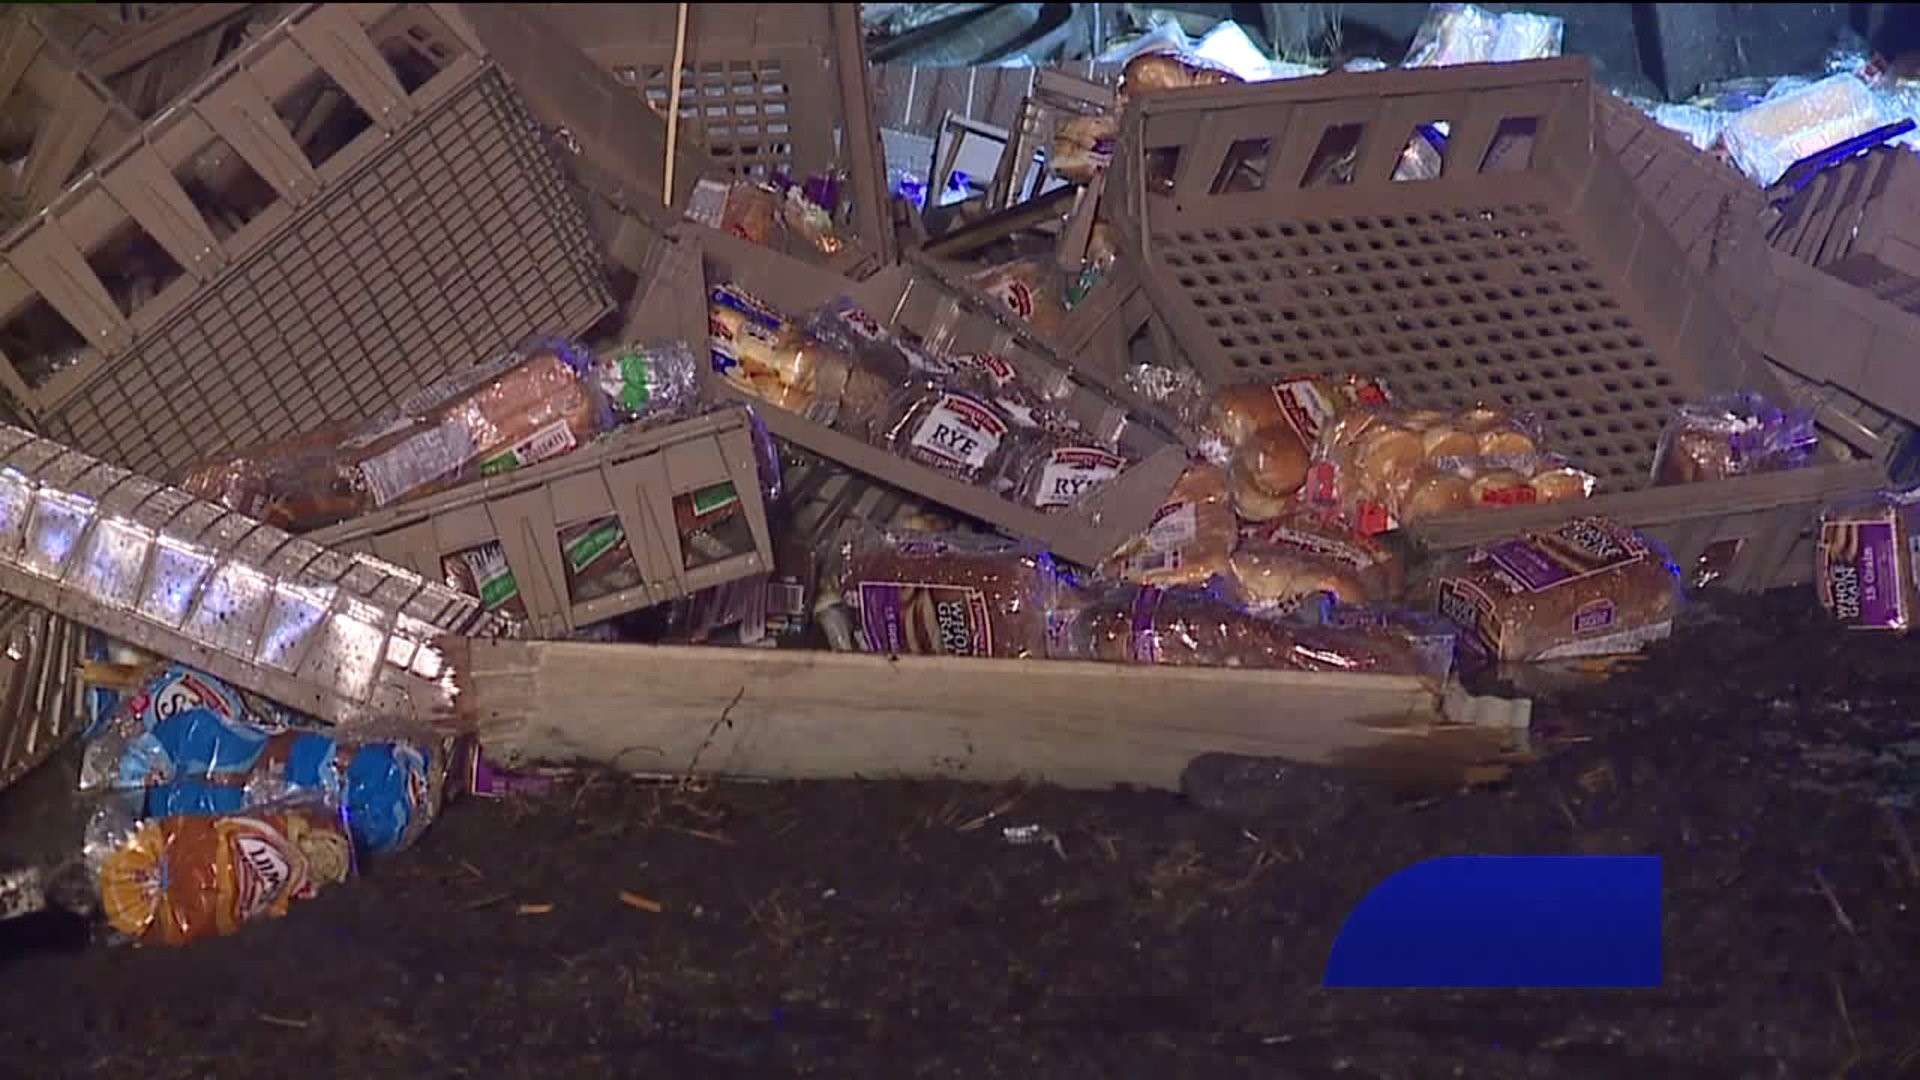 Truck Hauling Bread Crashes on Interstate in Luzerne County